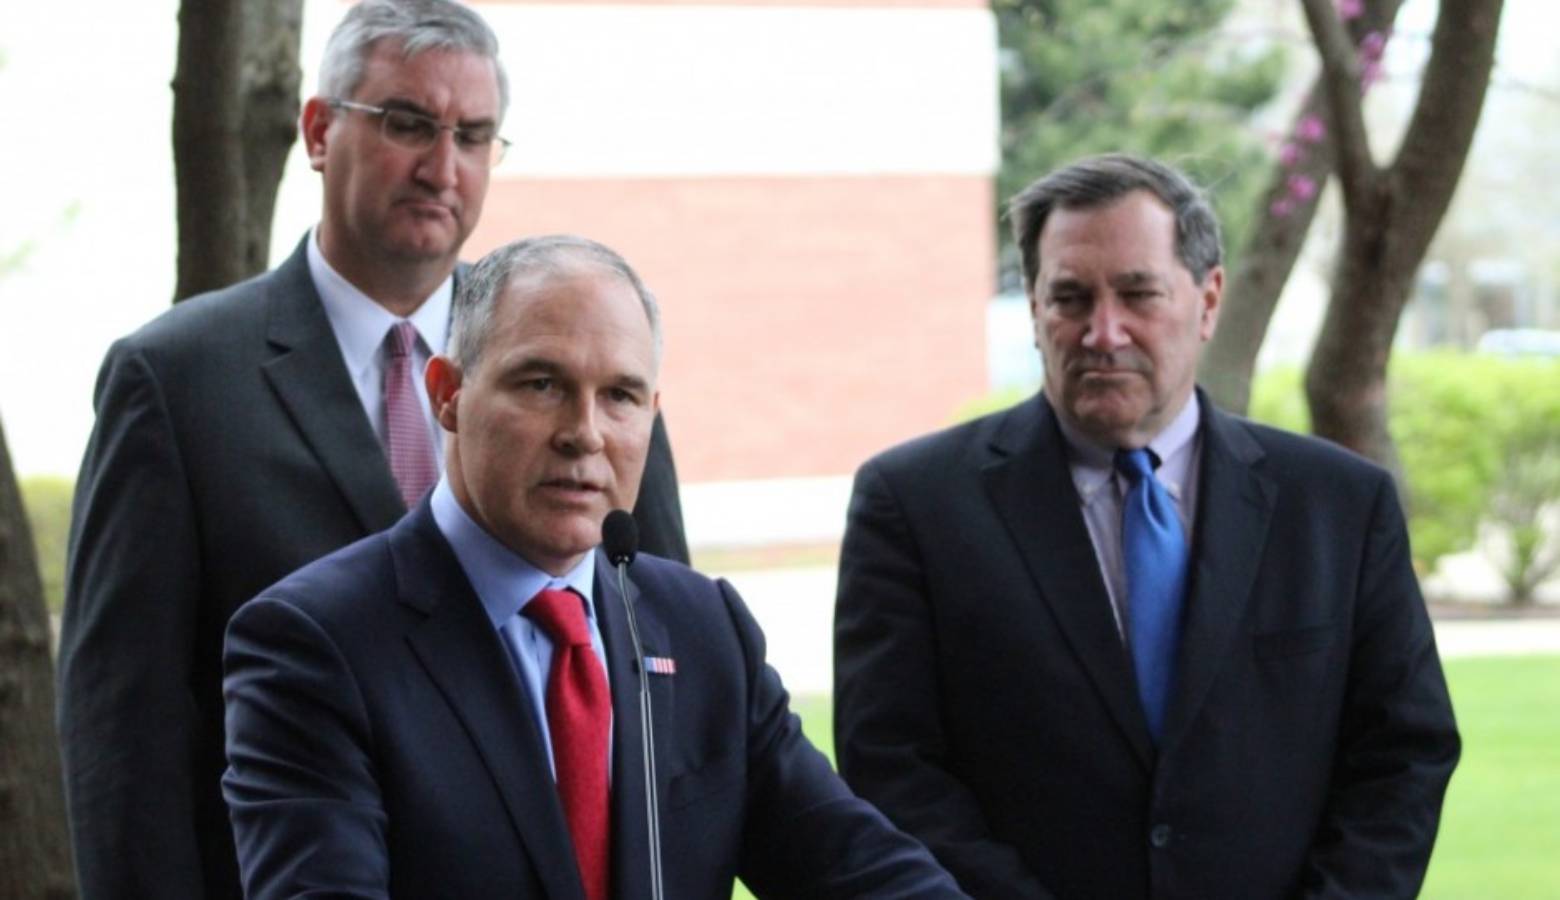 EPA Administrator Scott Pruitt addresses reporters during an April visit to East Chicago, Indiana, with state and local officials including Gov. Eric Holcomb and U.S. Sen. Joe Donnelly. (Annie Ropeik/IPB News)